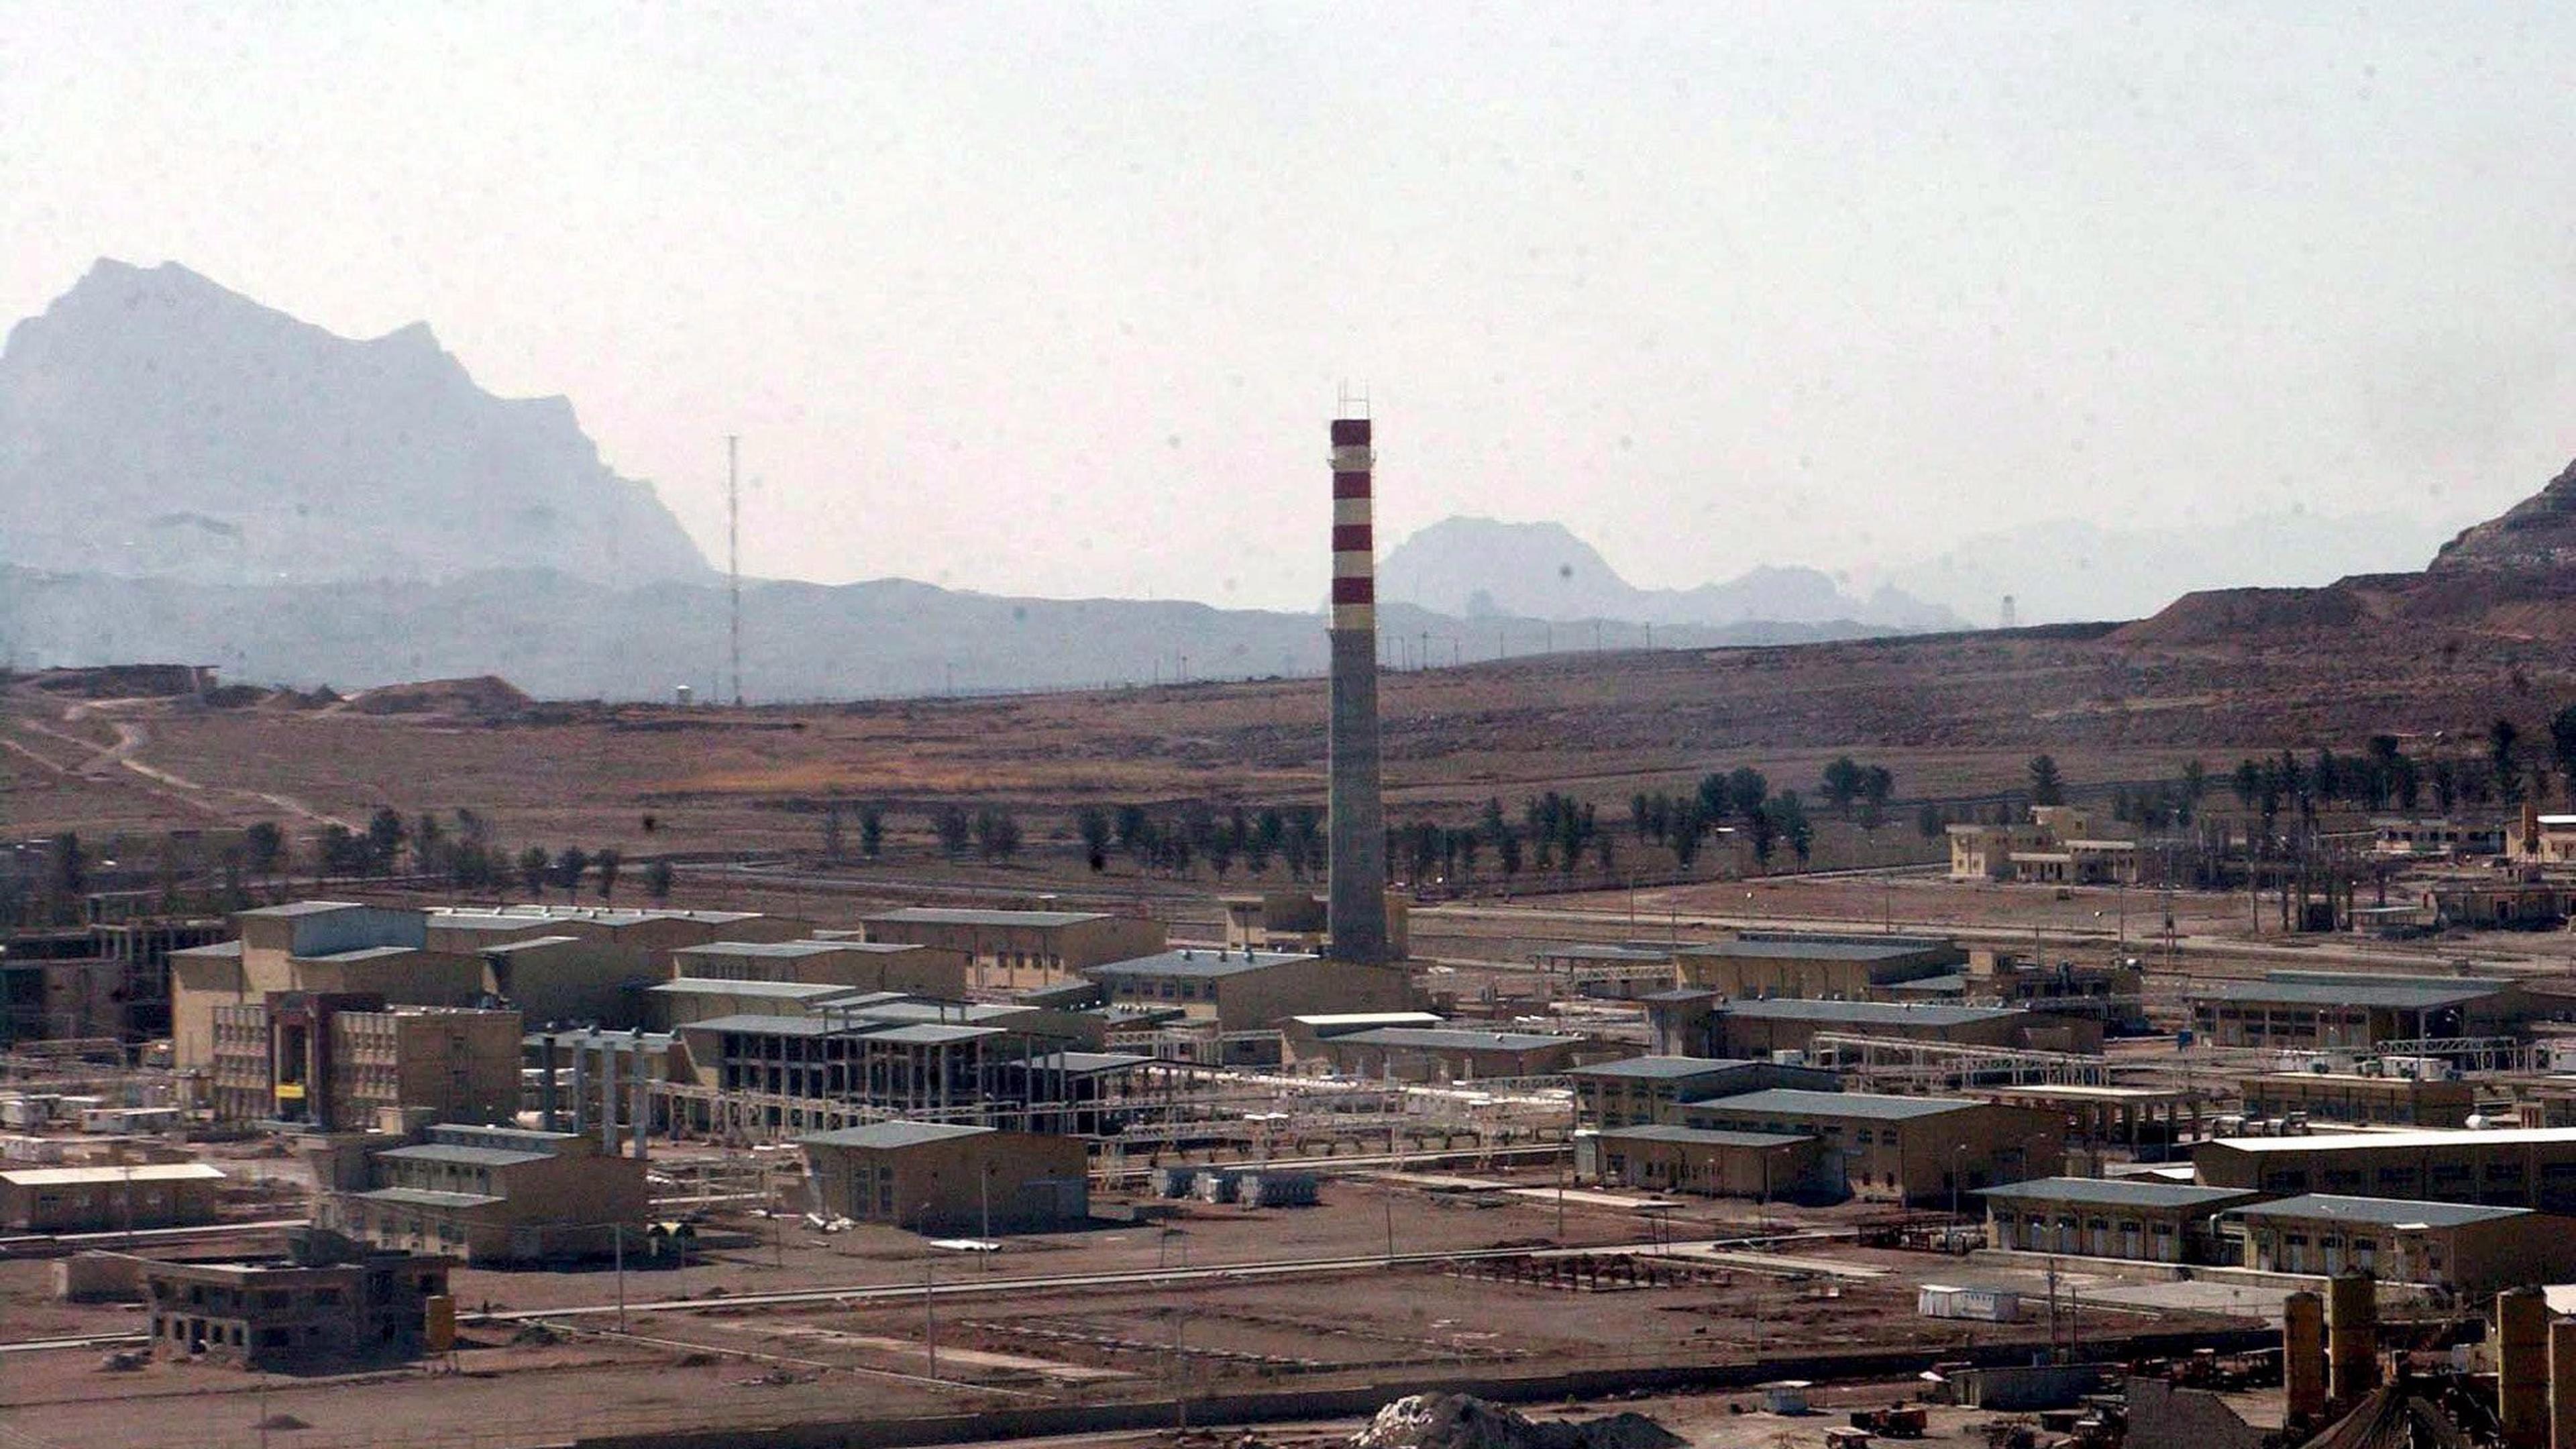 Library image from 2005 showing a uranium enrichment complex in the Iranian city of Isfahan.